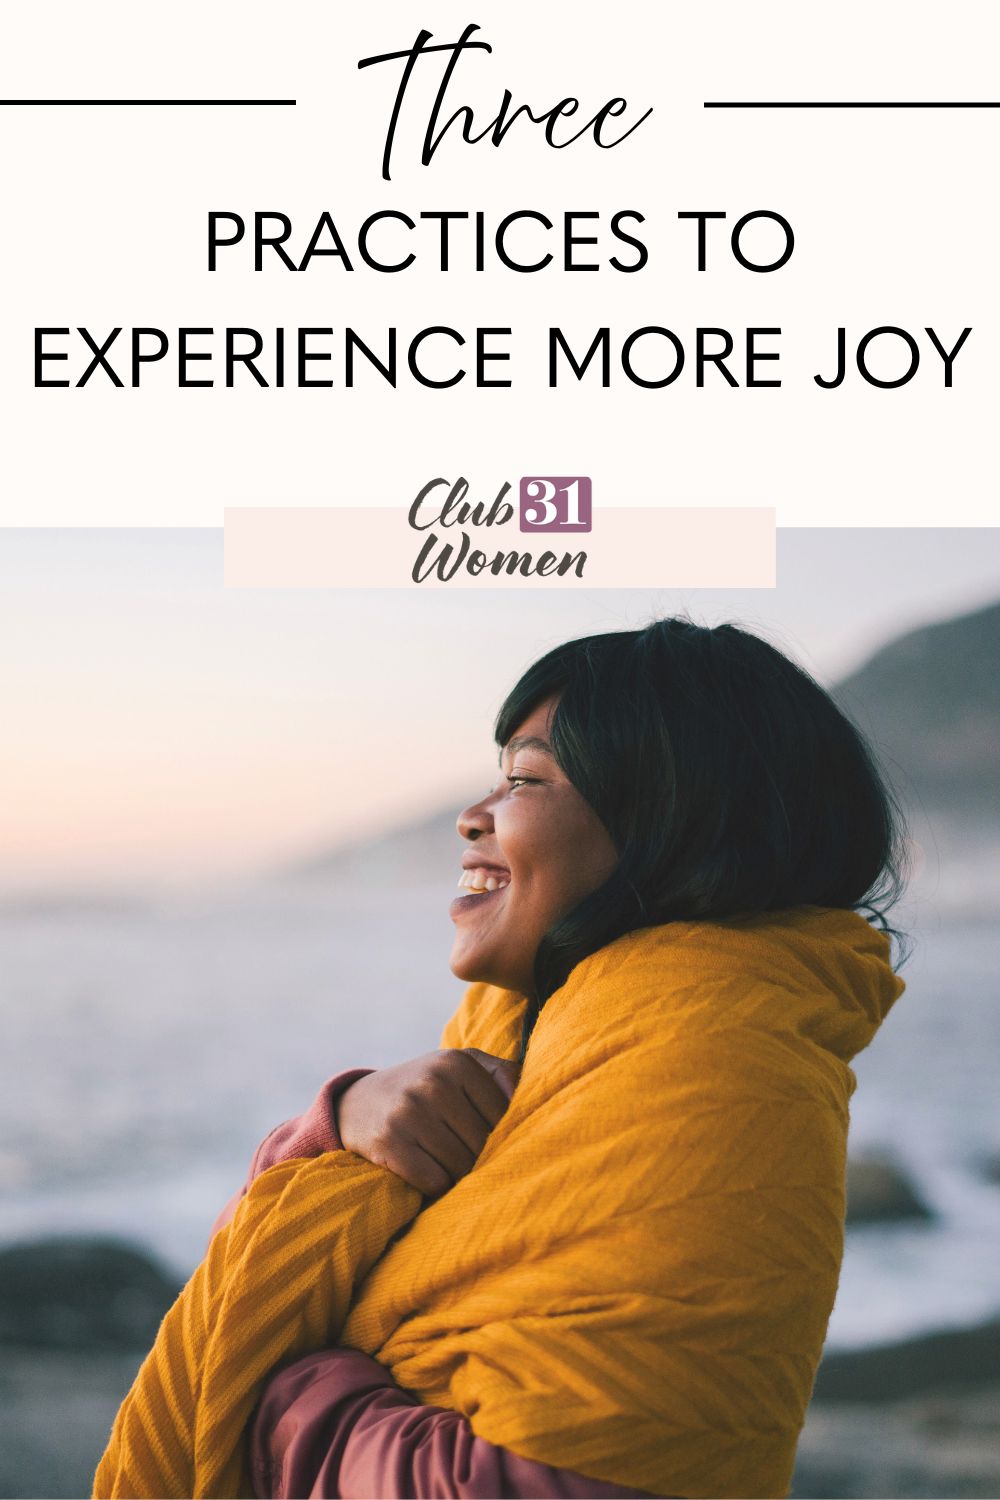 How can you experience more joy in your life? Are you sabotaging your joy? There are three things you can practice right were you are. via @Club31Women